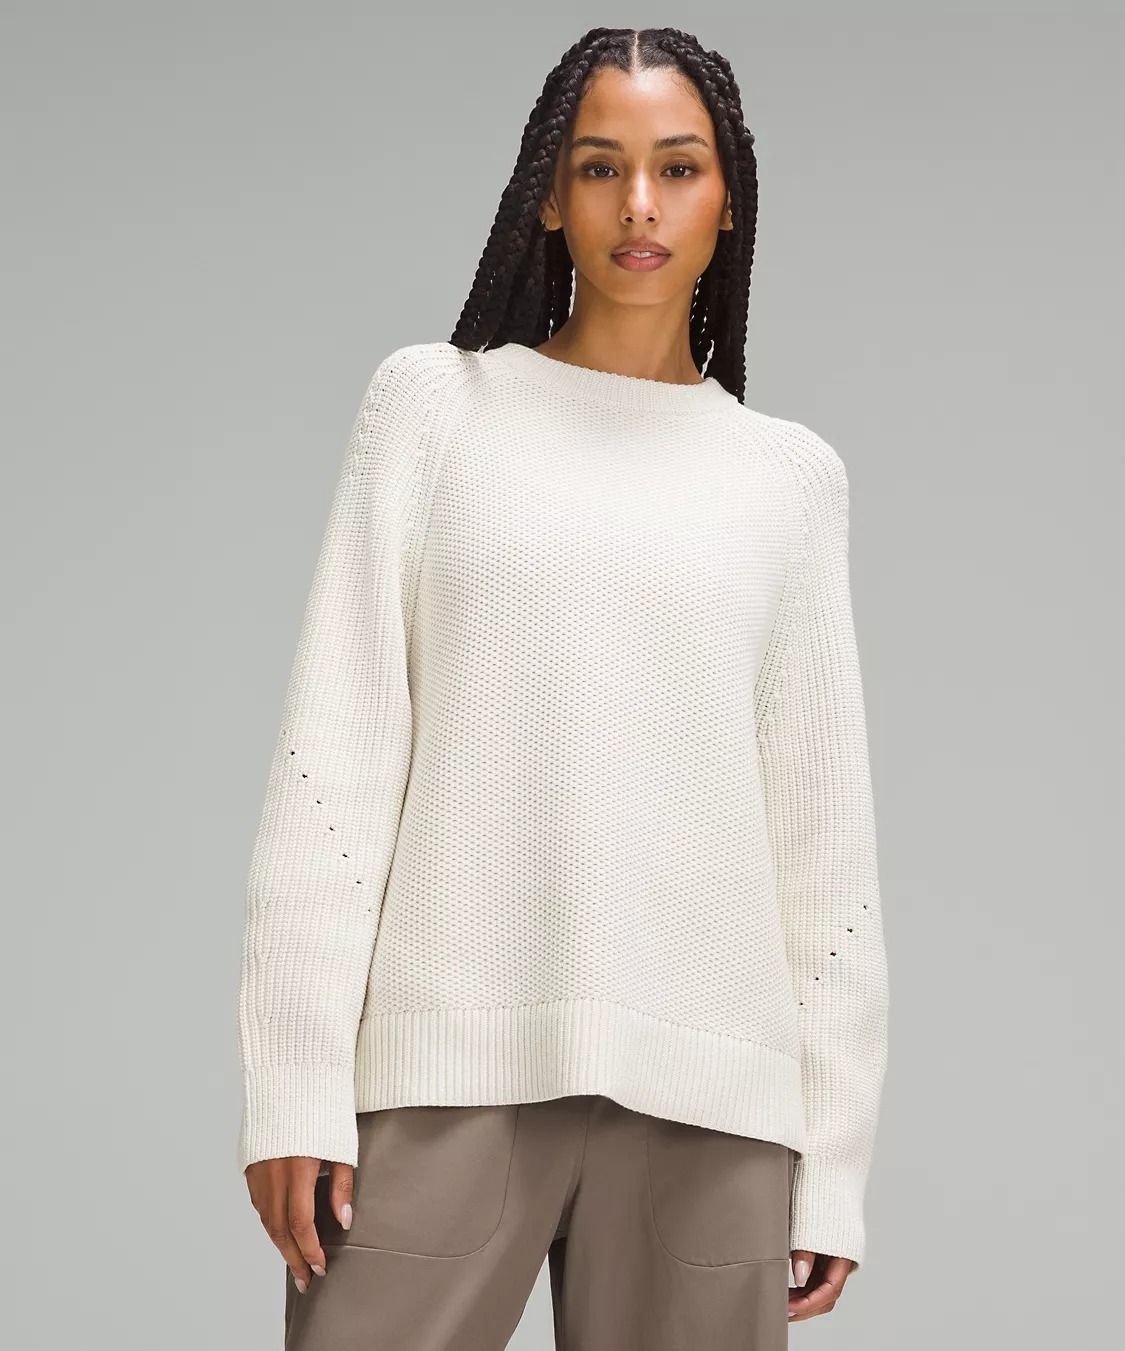 Model wearing a textured white sweater